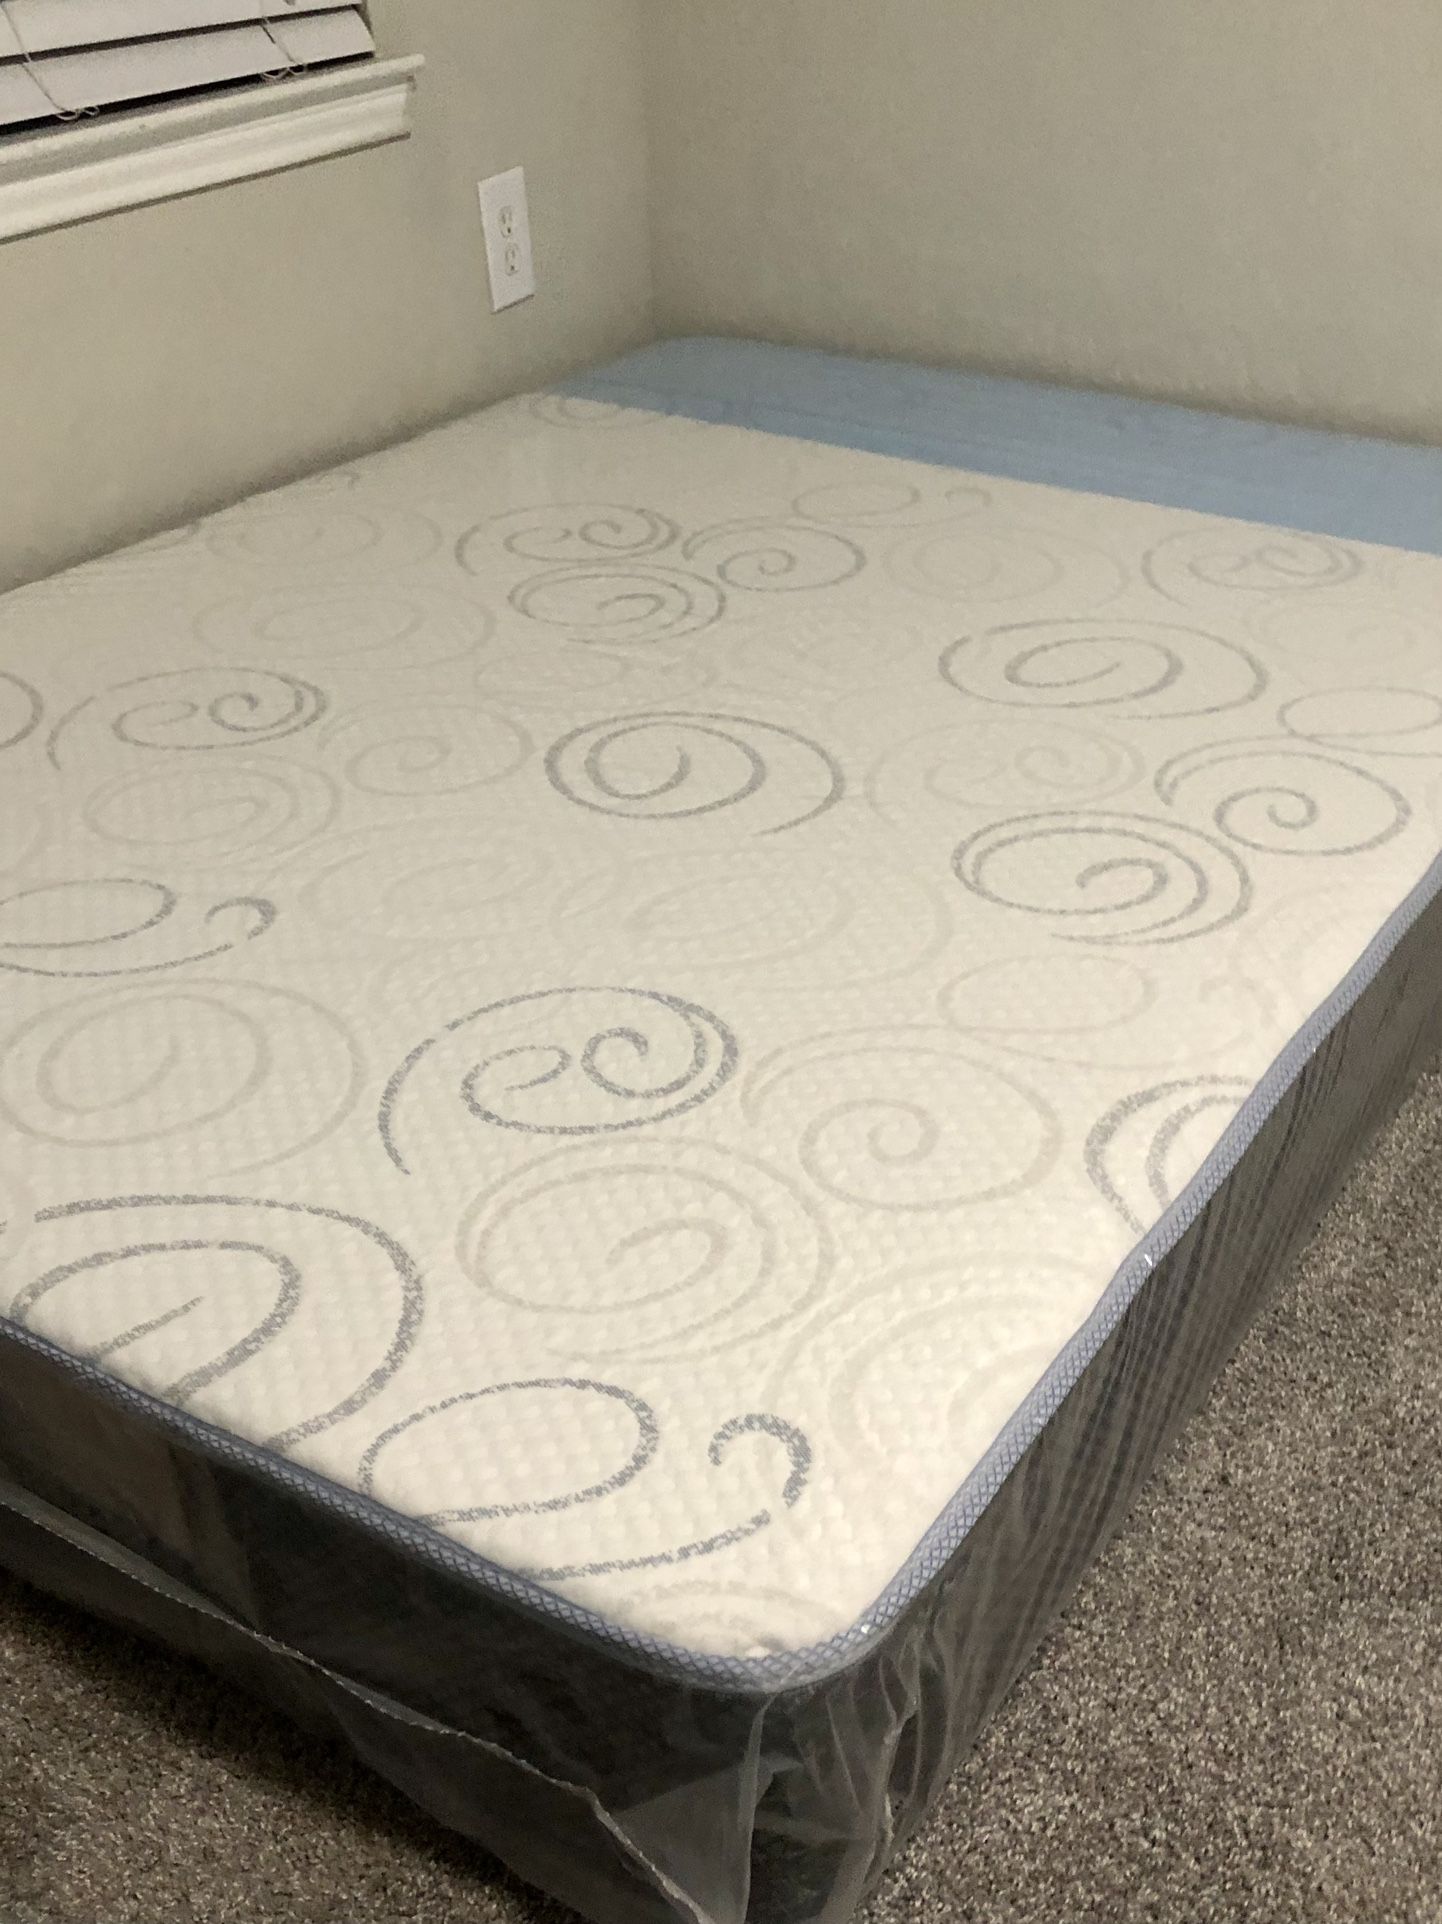 Full Size Mattress 10 Inches Thick Also Available in Twin-Queen-King New From Factory Same Day Delivery